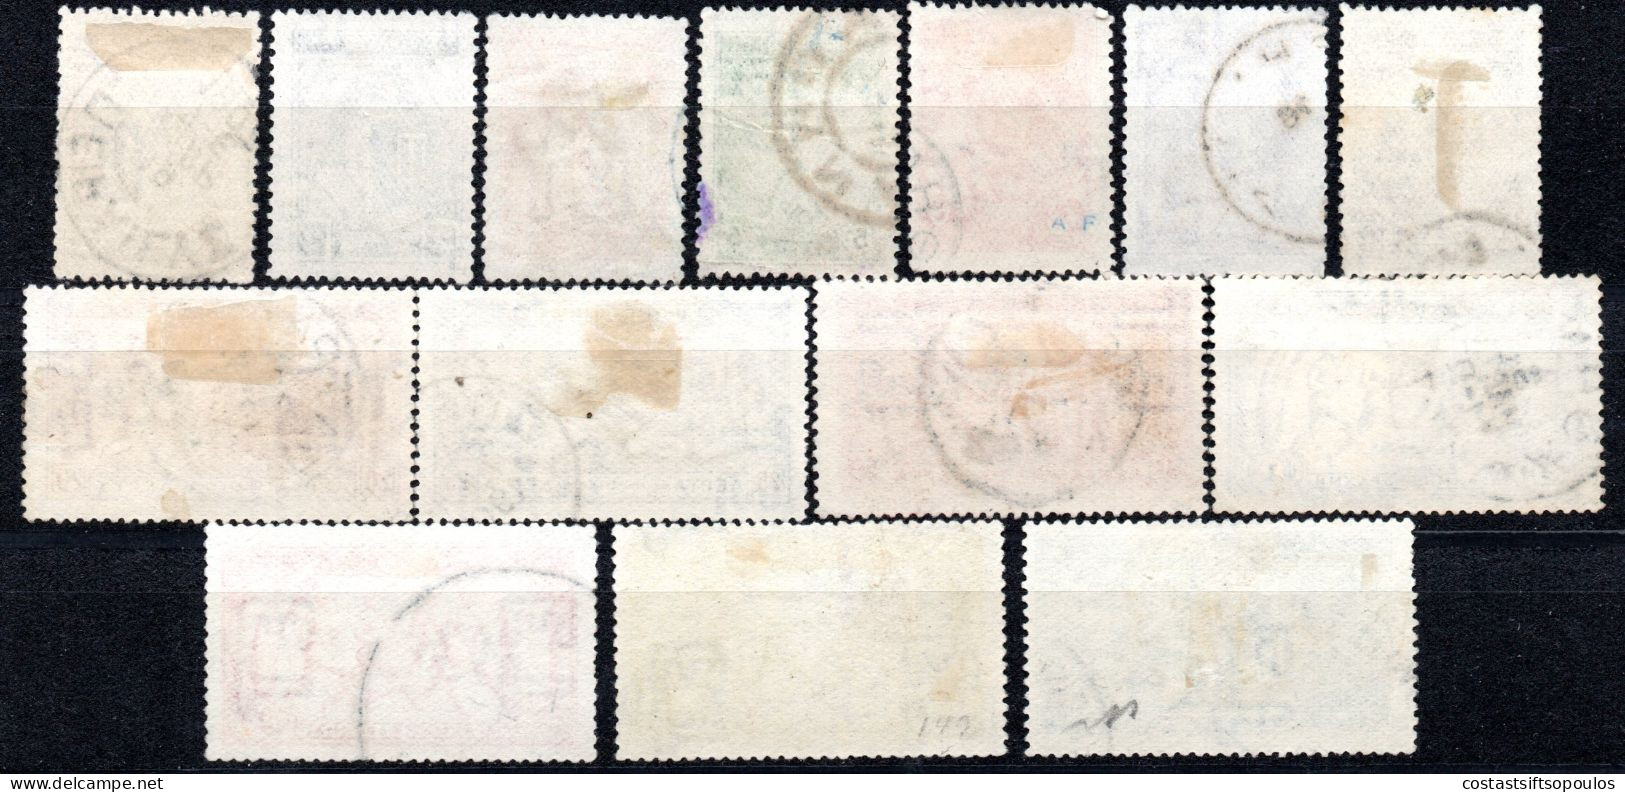 1496. GREECE 1906 2nd. OLYMIC GAMES SC.184-197 Y.T.165-178 USED SET.6 SCANS - Used Stamps